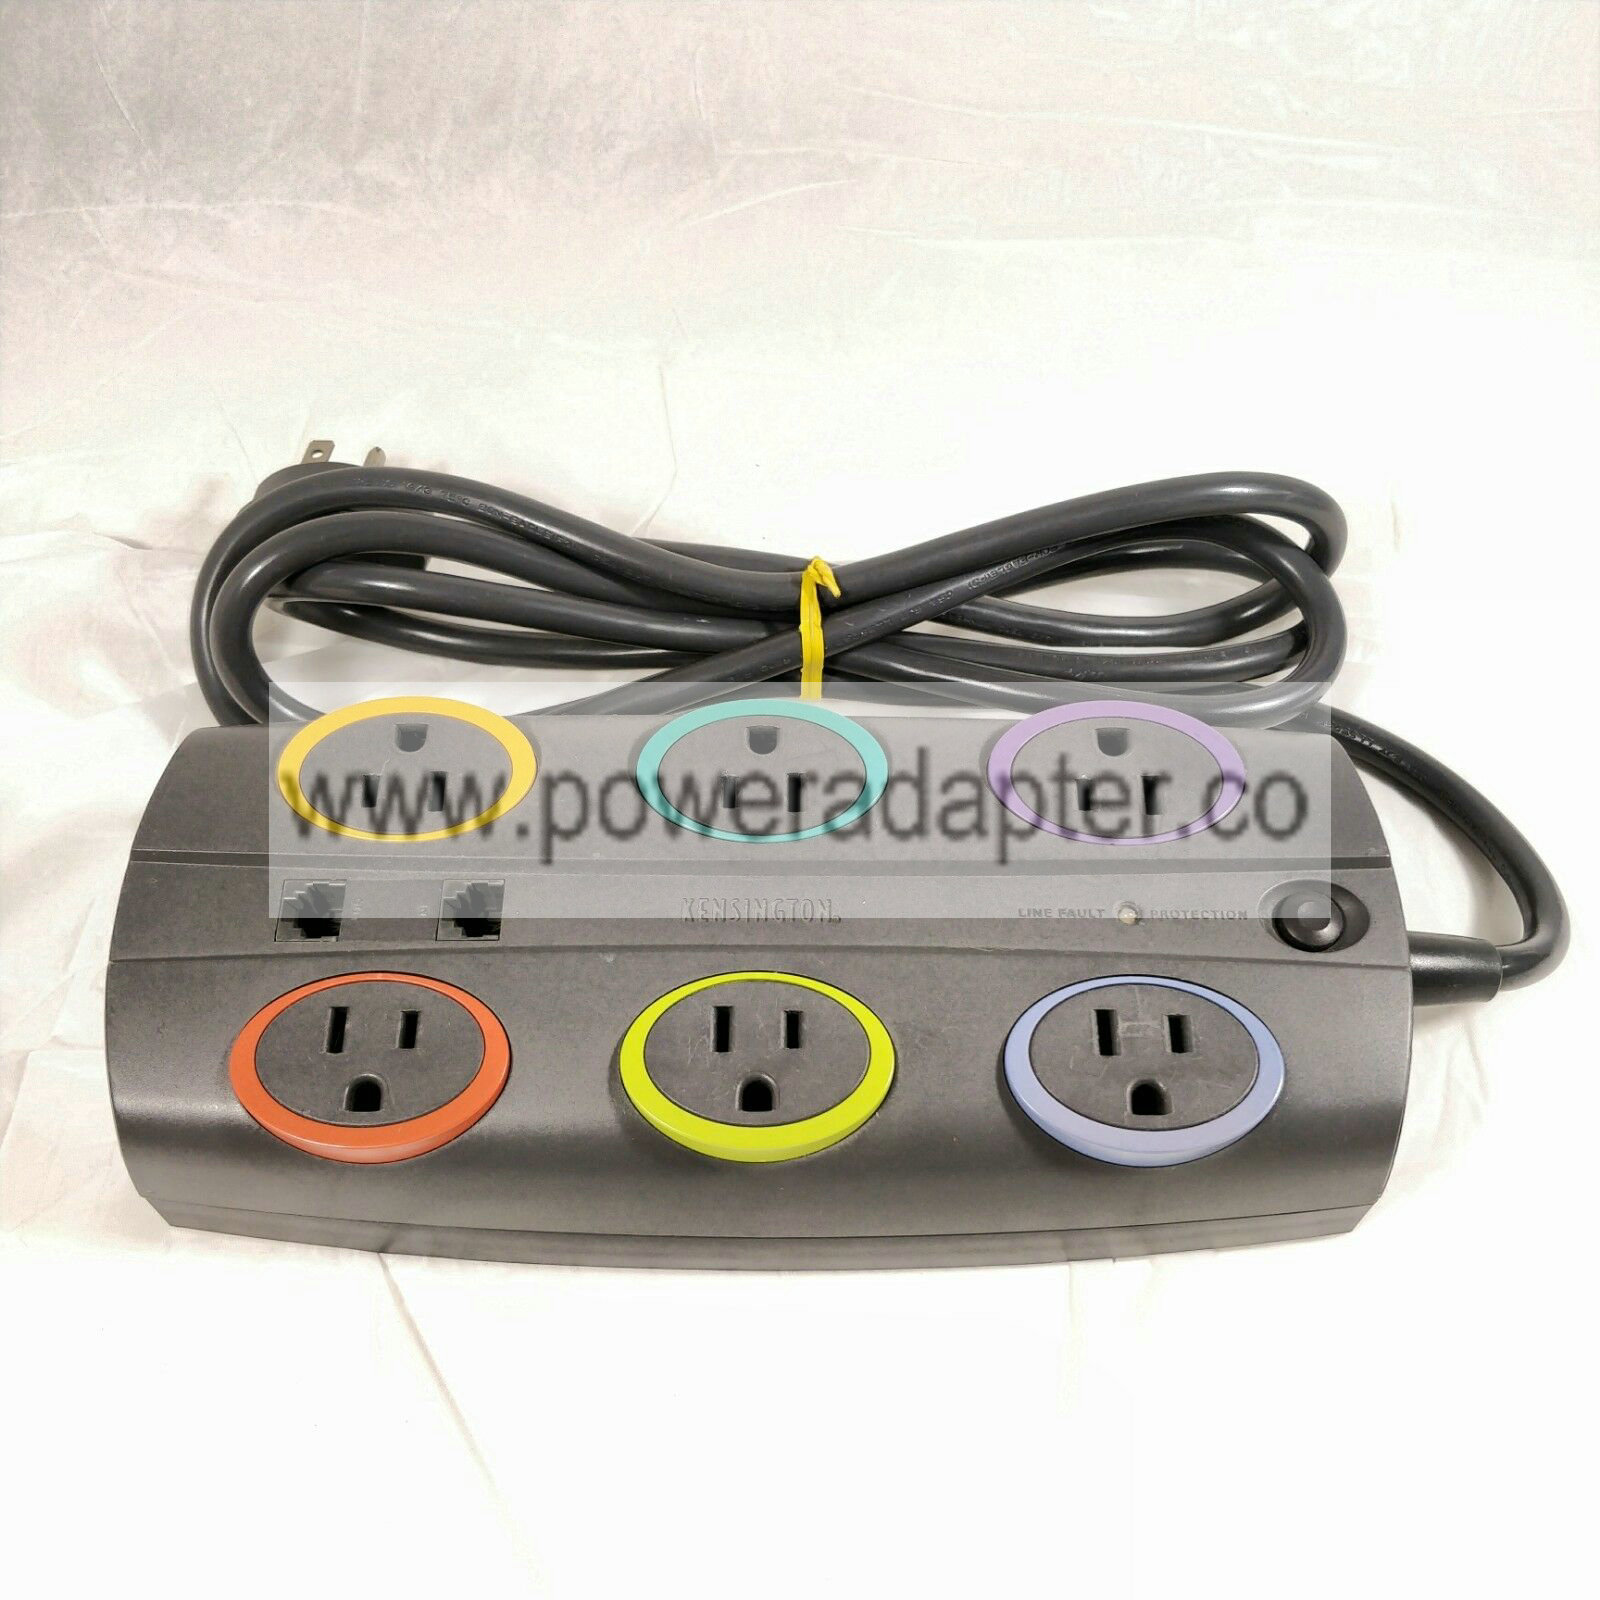 Kensington Line Fault Protection Six Outlet Model Number K62151 Tested GUC Great Price on a good Surge protector. &